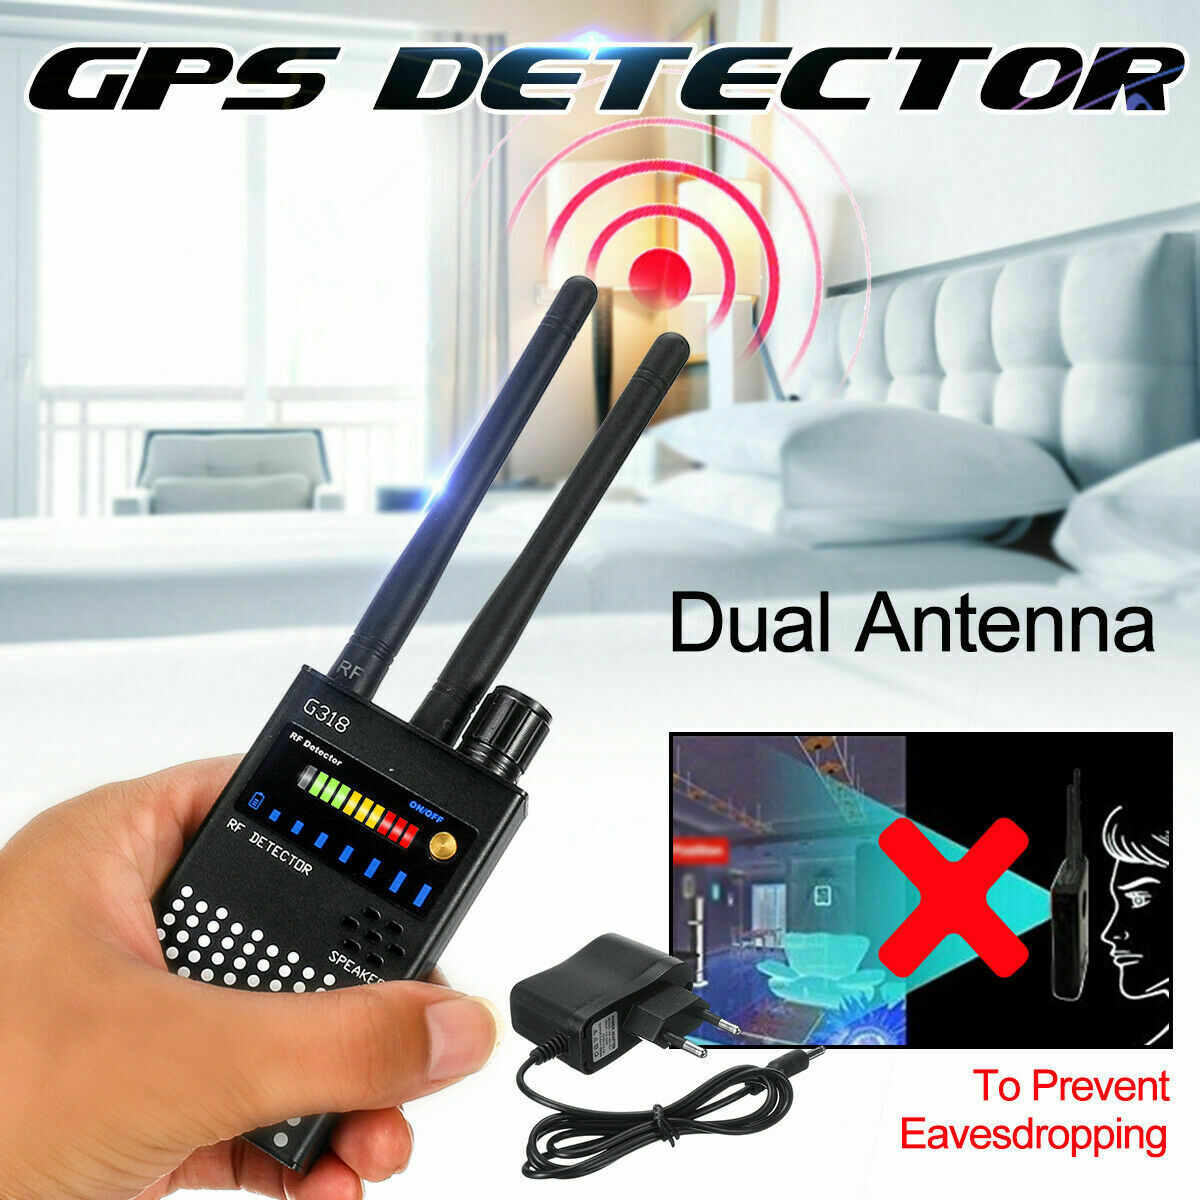 Gps Signal Detector Wave Frequency Scanner Detector Spy Equipment Anti-eavesdropping rf Signal track